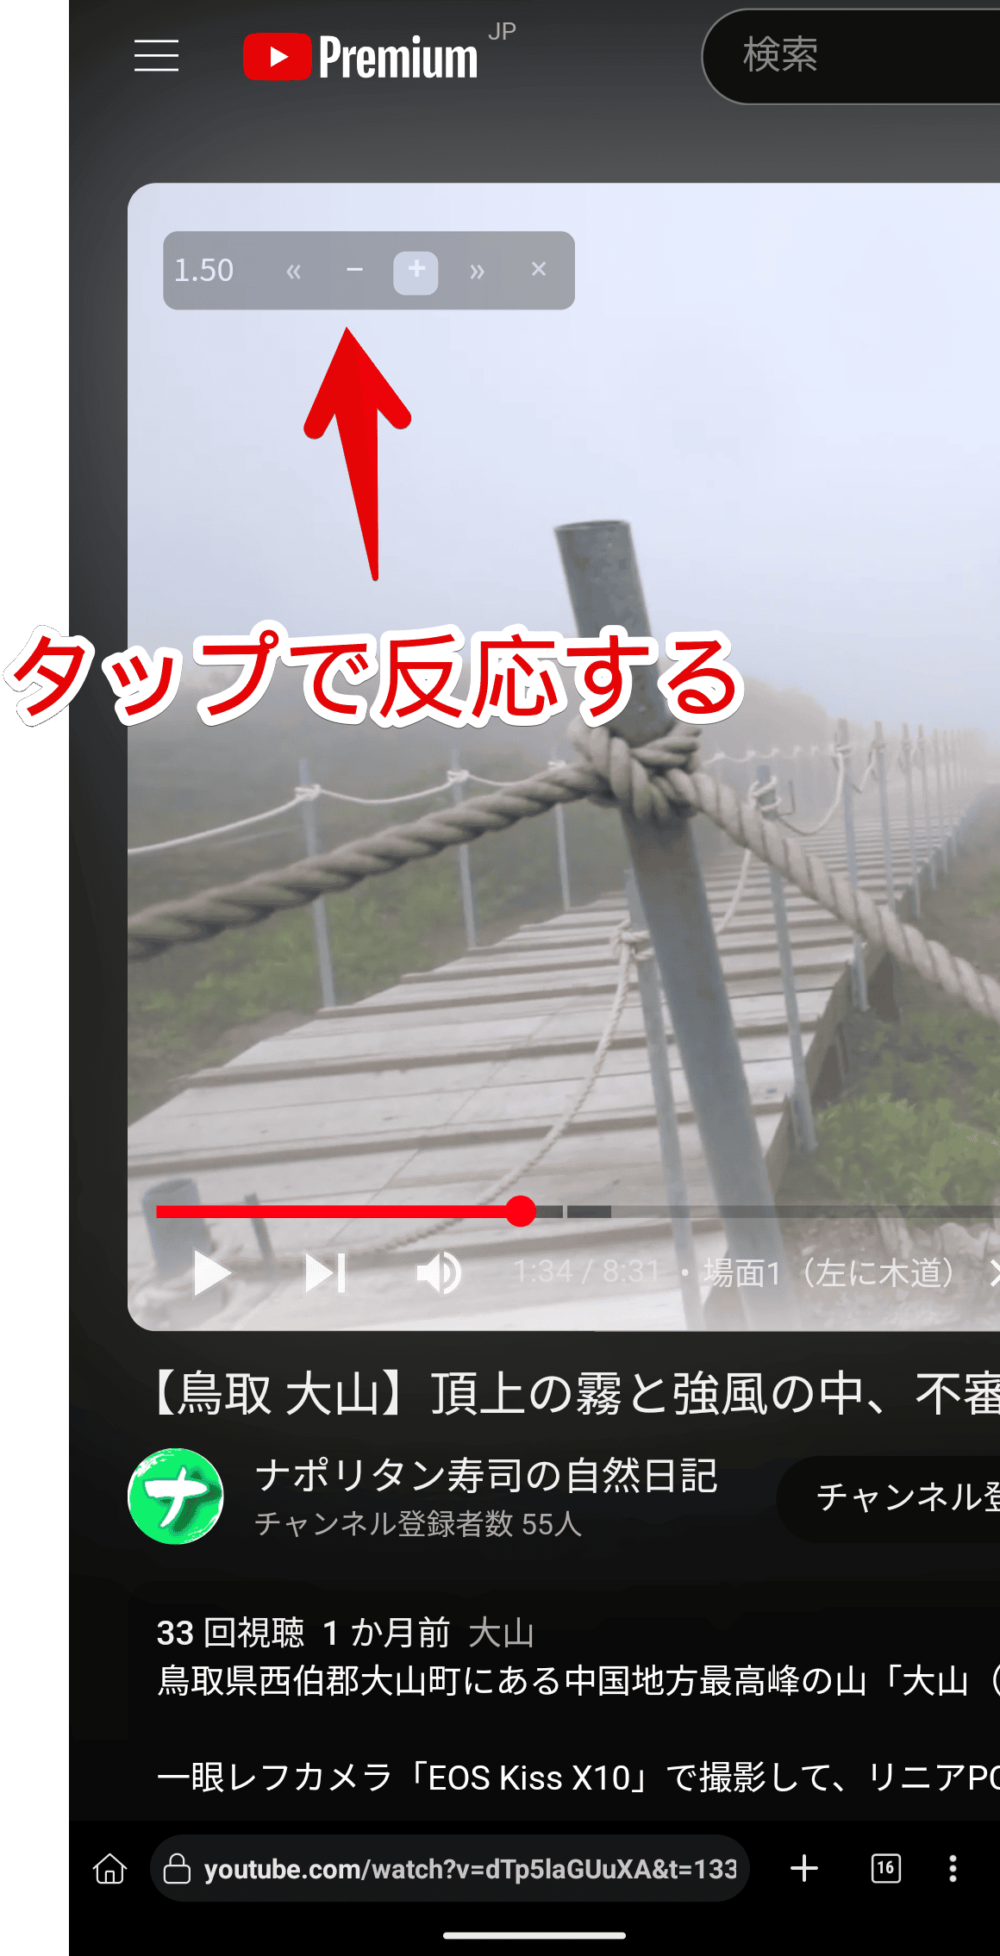 「Kiwi Browser（Android）」で開いたYouTube上で「Video Speed Controller」を使う手順画像2